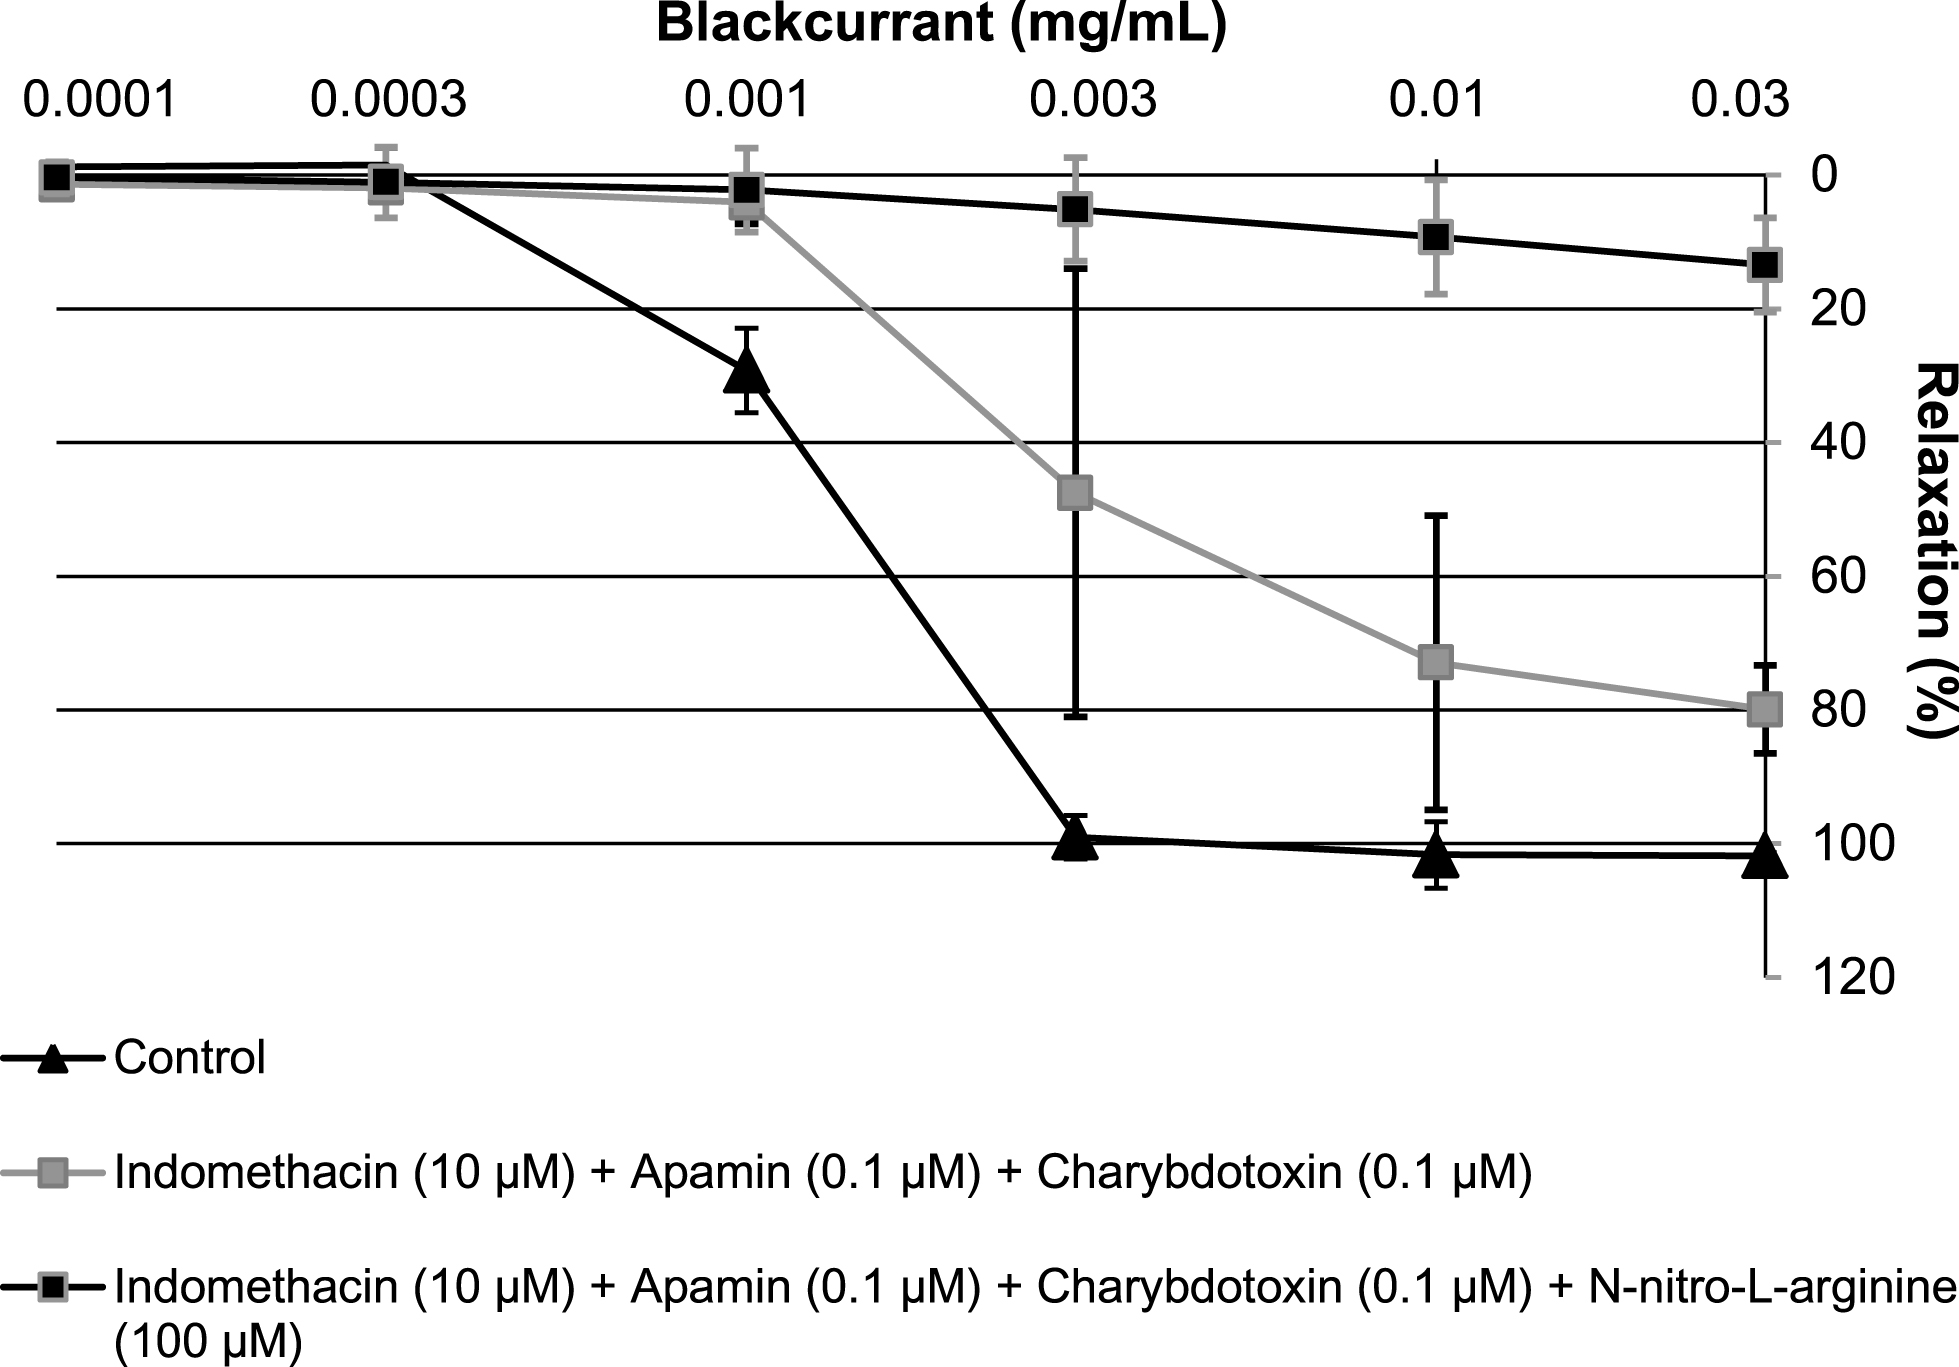 Characterisation of the relaxation induced by increasing concentrations of blackcurrant leaf extract (0.0001 to 0.03 mg/mL) in porcine coronary artery rings, precontracted with U46619. Rings with an intact endothelium were incubated with various inhibitors: NG-nitro-L-arginine (100μM) and/or apamin+charybdotoxin (0.1μM each). All experiments were performed in the presence of indomethacin (10μM). Data are shown as mean±SD of two independent experiments.